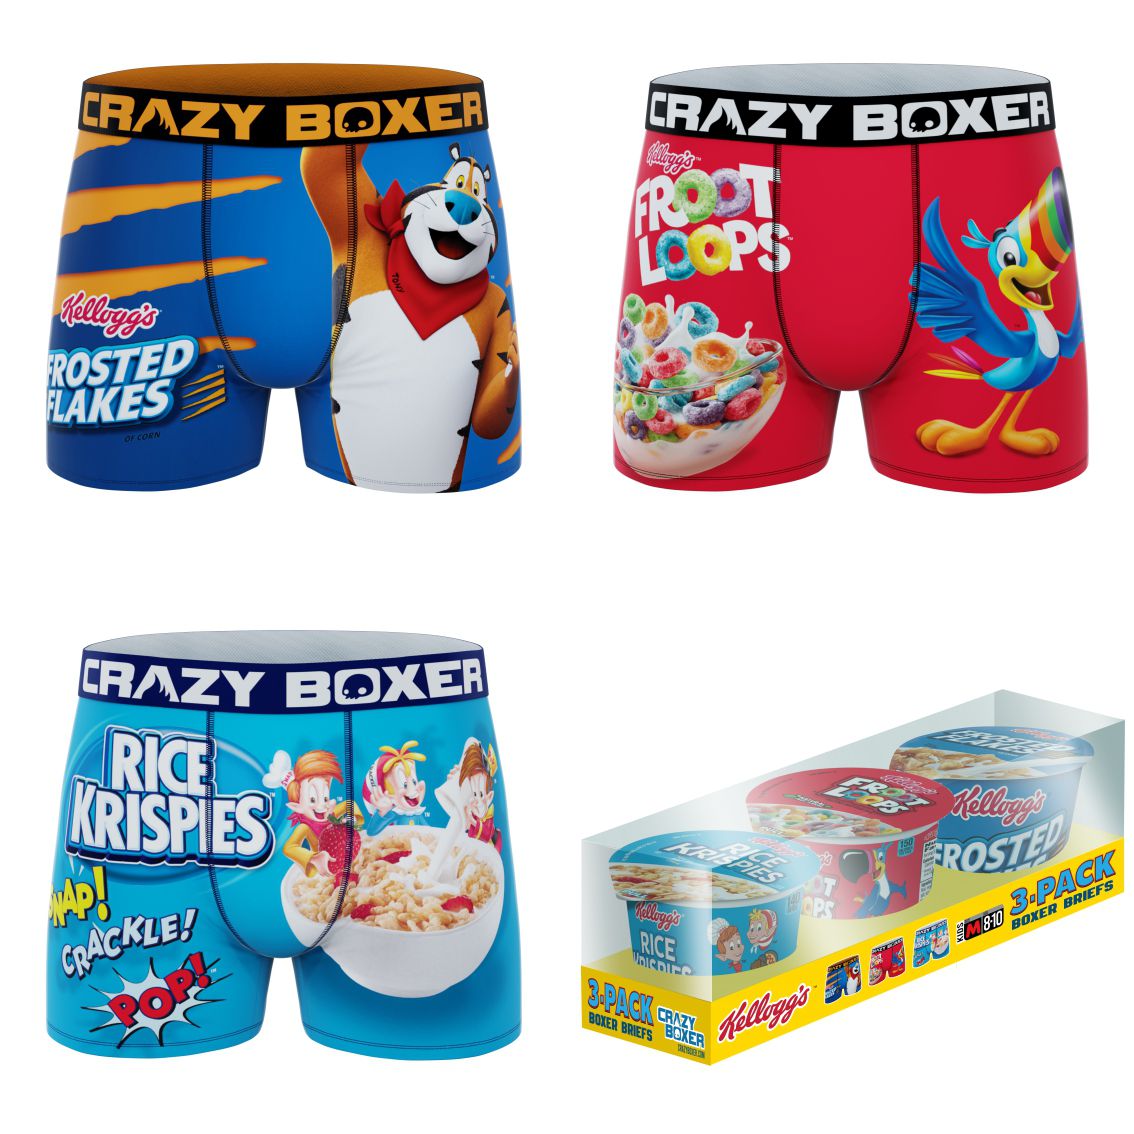 SWAG Rice Krispies Cereal Boxer Briefs, Box, Men's Size S M L XL Novelty  B27 MP